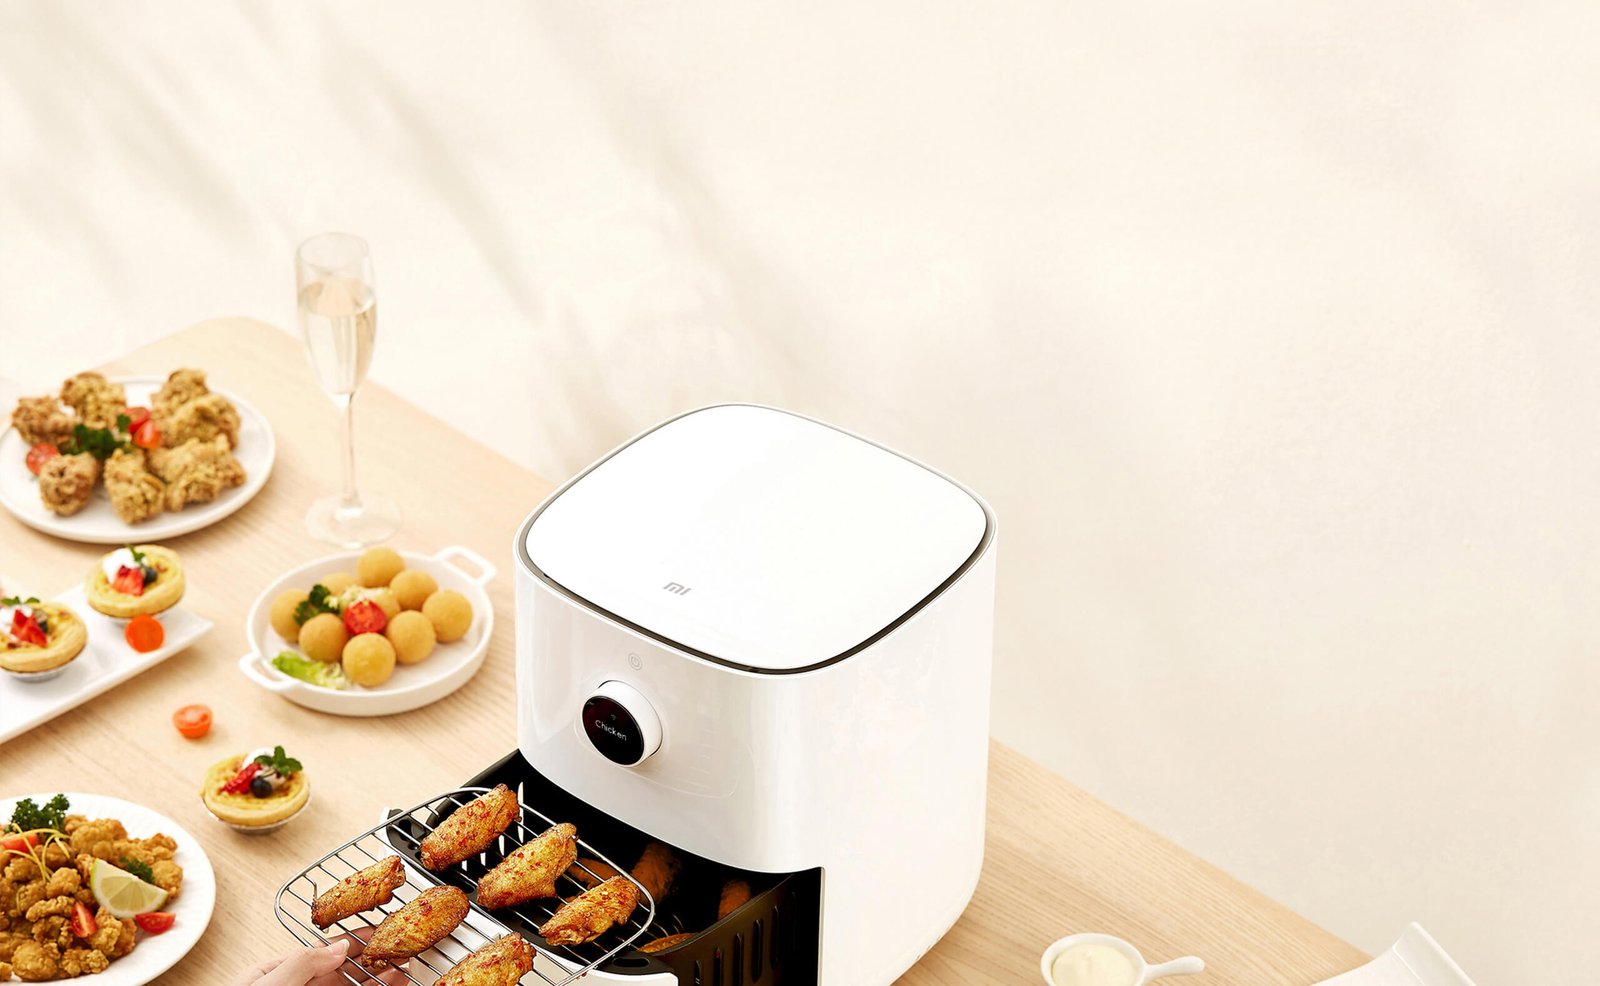 https://pc-tablet.com/wp-content/uploads/2022/08/Xiaomi-Smart-Air-Fryer-with-OLED-screen-launched-in-India.jpg